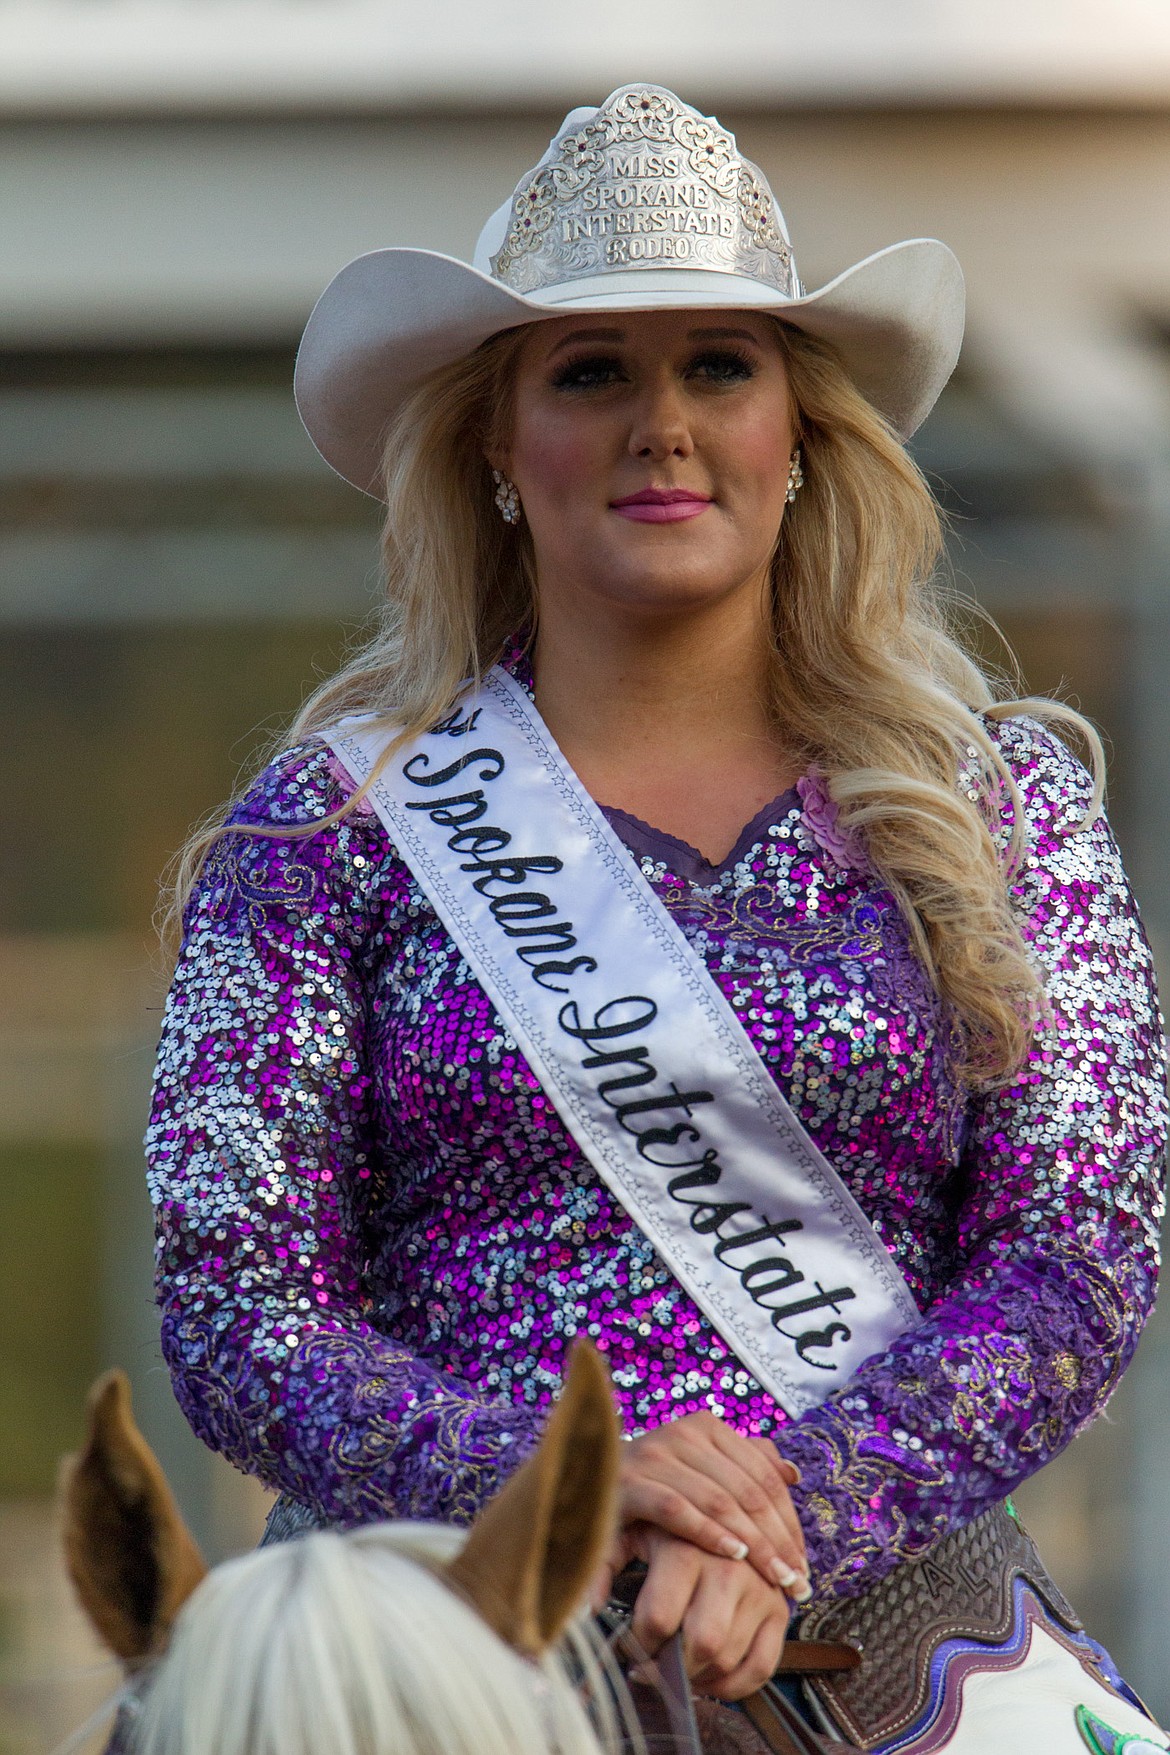 Ashley Lentz, Miss Spokane Interstate Rodeo Queen, attends the Kootenai River Stampede PRCA Rodeo in Libby Saturday, Aug. 5, 2017. (John Blodgett/The Western News file photo)